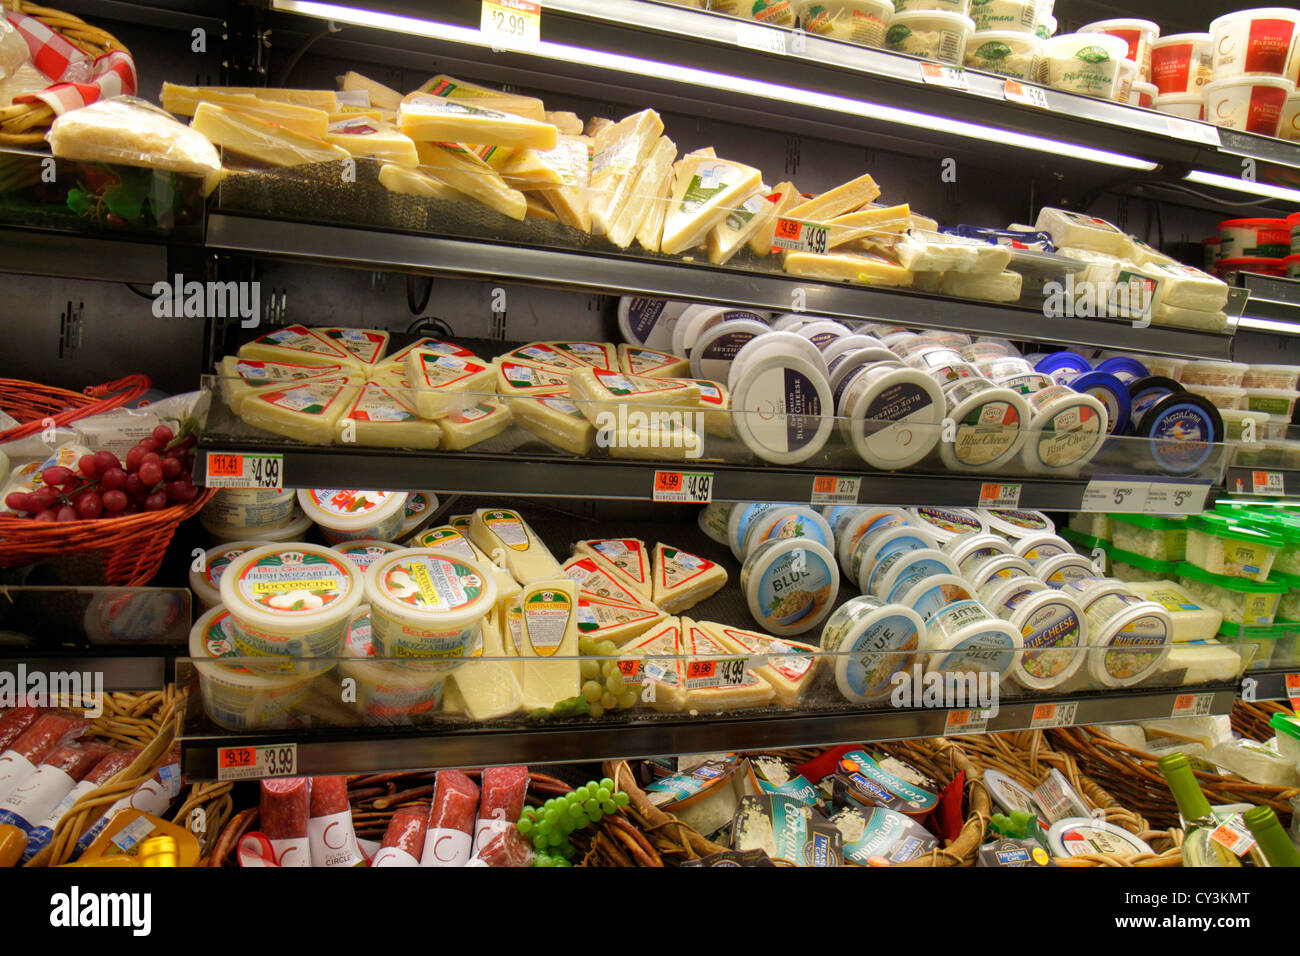 Portland Maine,Scarborough,Shaw's,grocery store,supermarket,display case sale,brands,cheese,ME120826118 Stock Photo